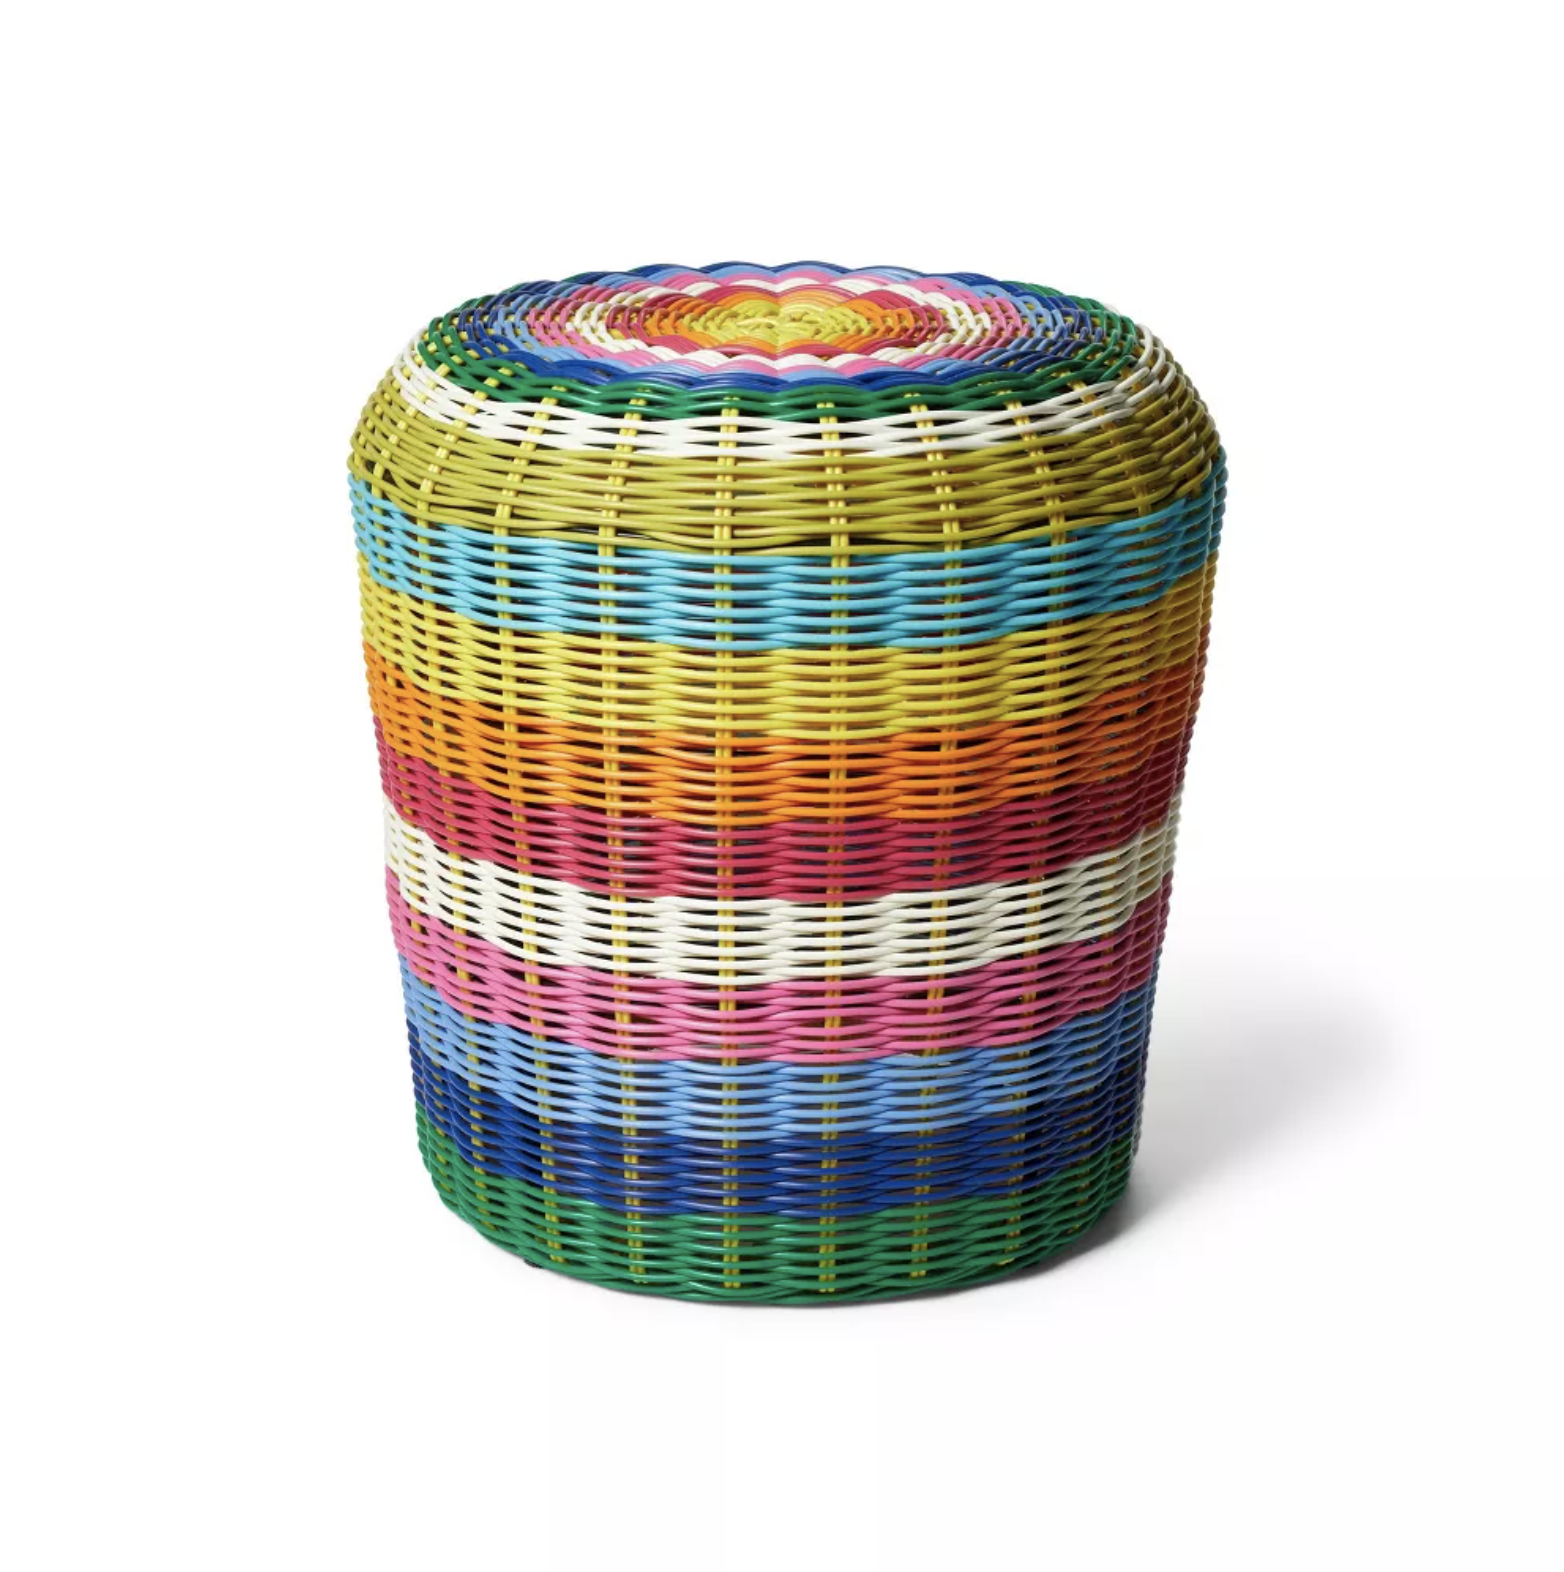 Colorful striped woven side table